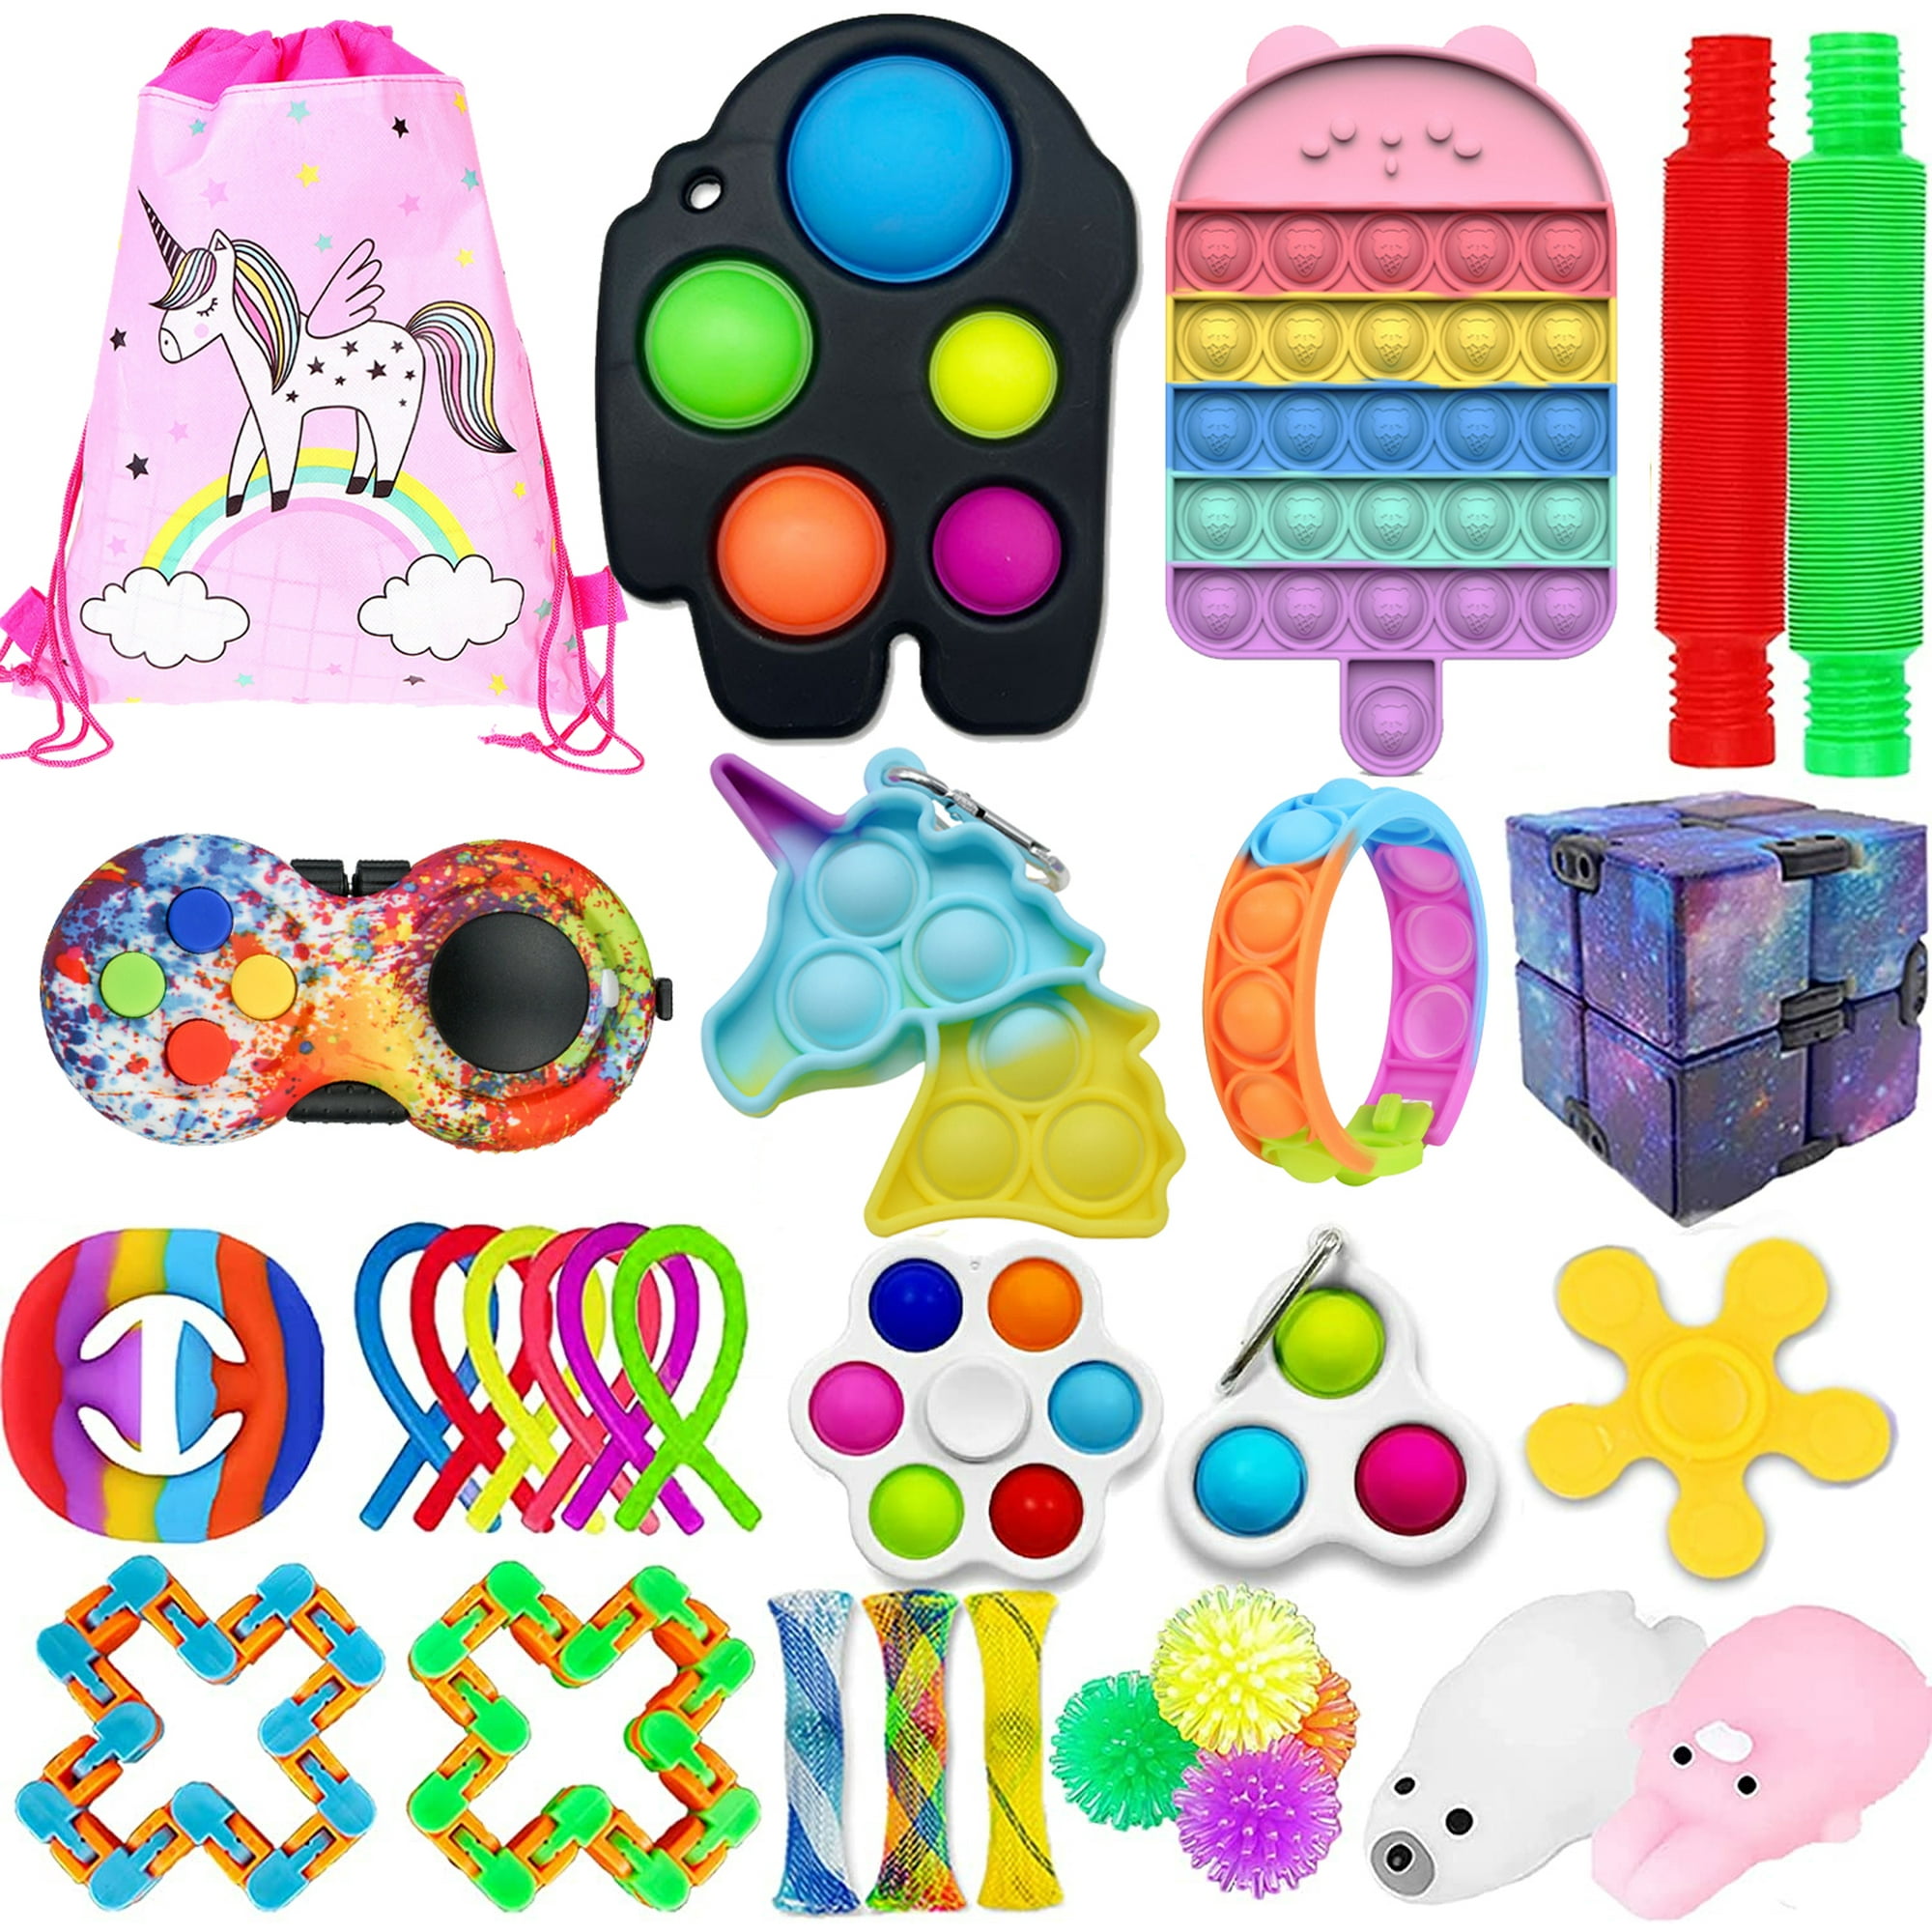 Stress Relief And Anti-Anxiety Fidget Toys Pack For Kids, 54% OFF